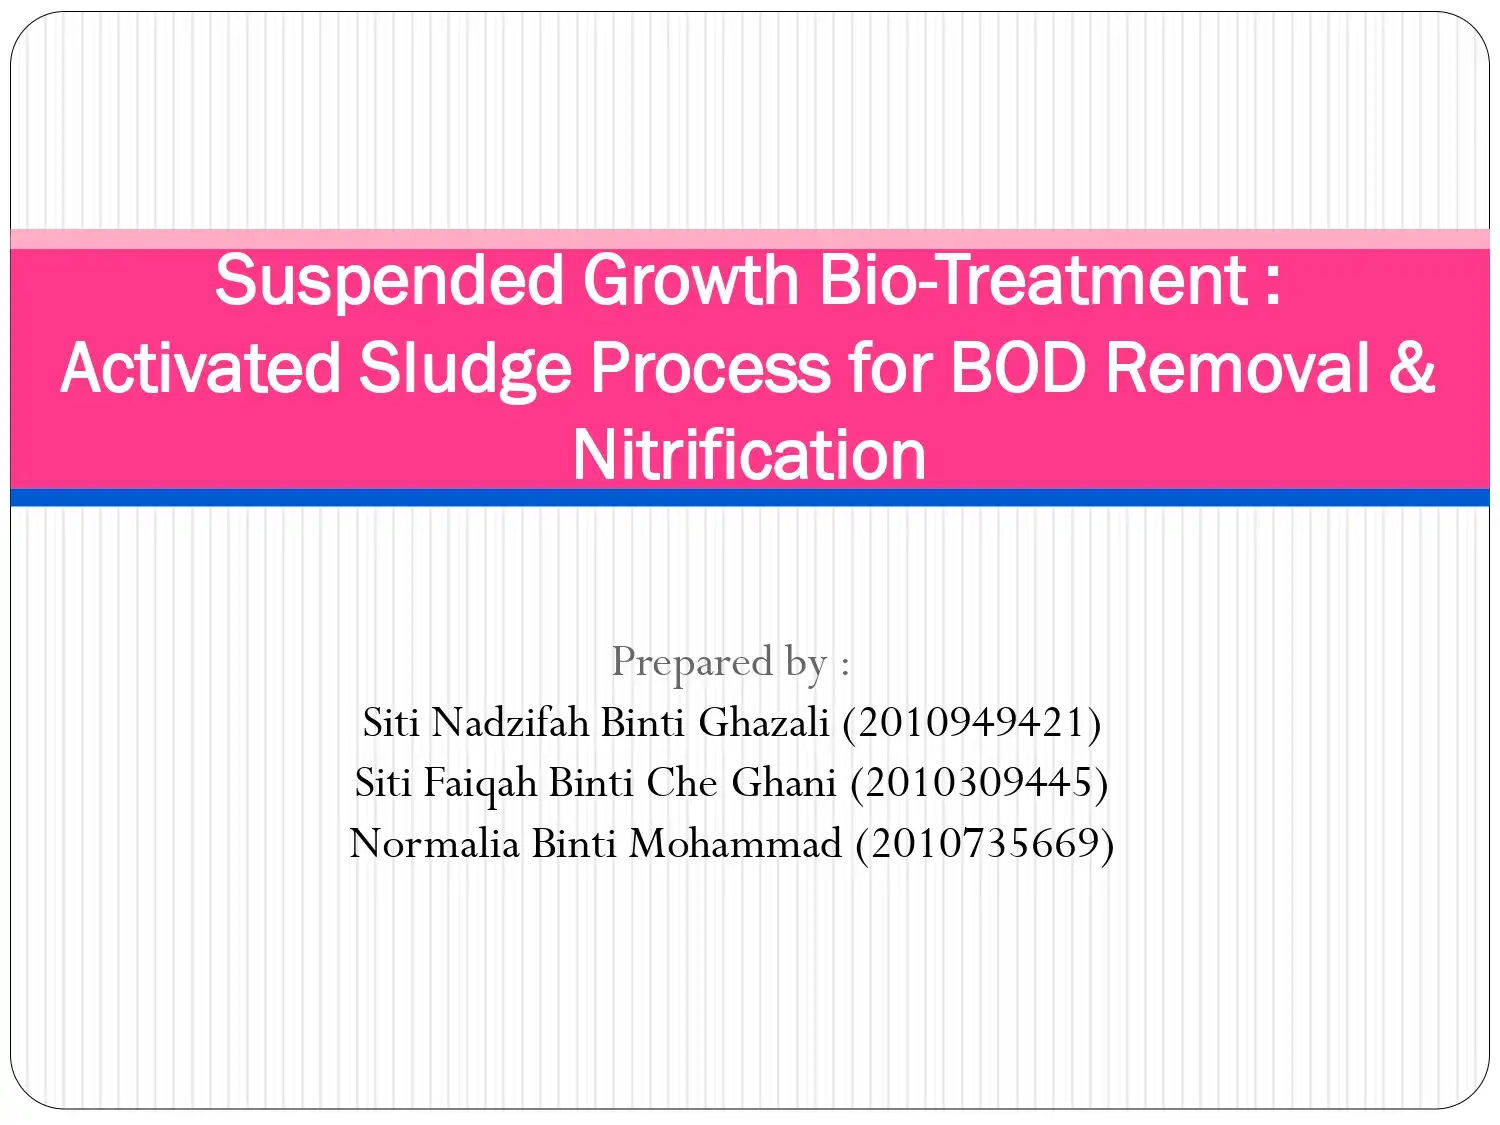 Suspended Growth Bio-Treatment : Activated Sludge Process for BOD Removal & Nitrification